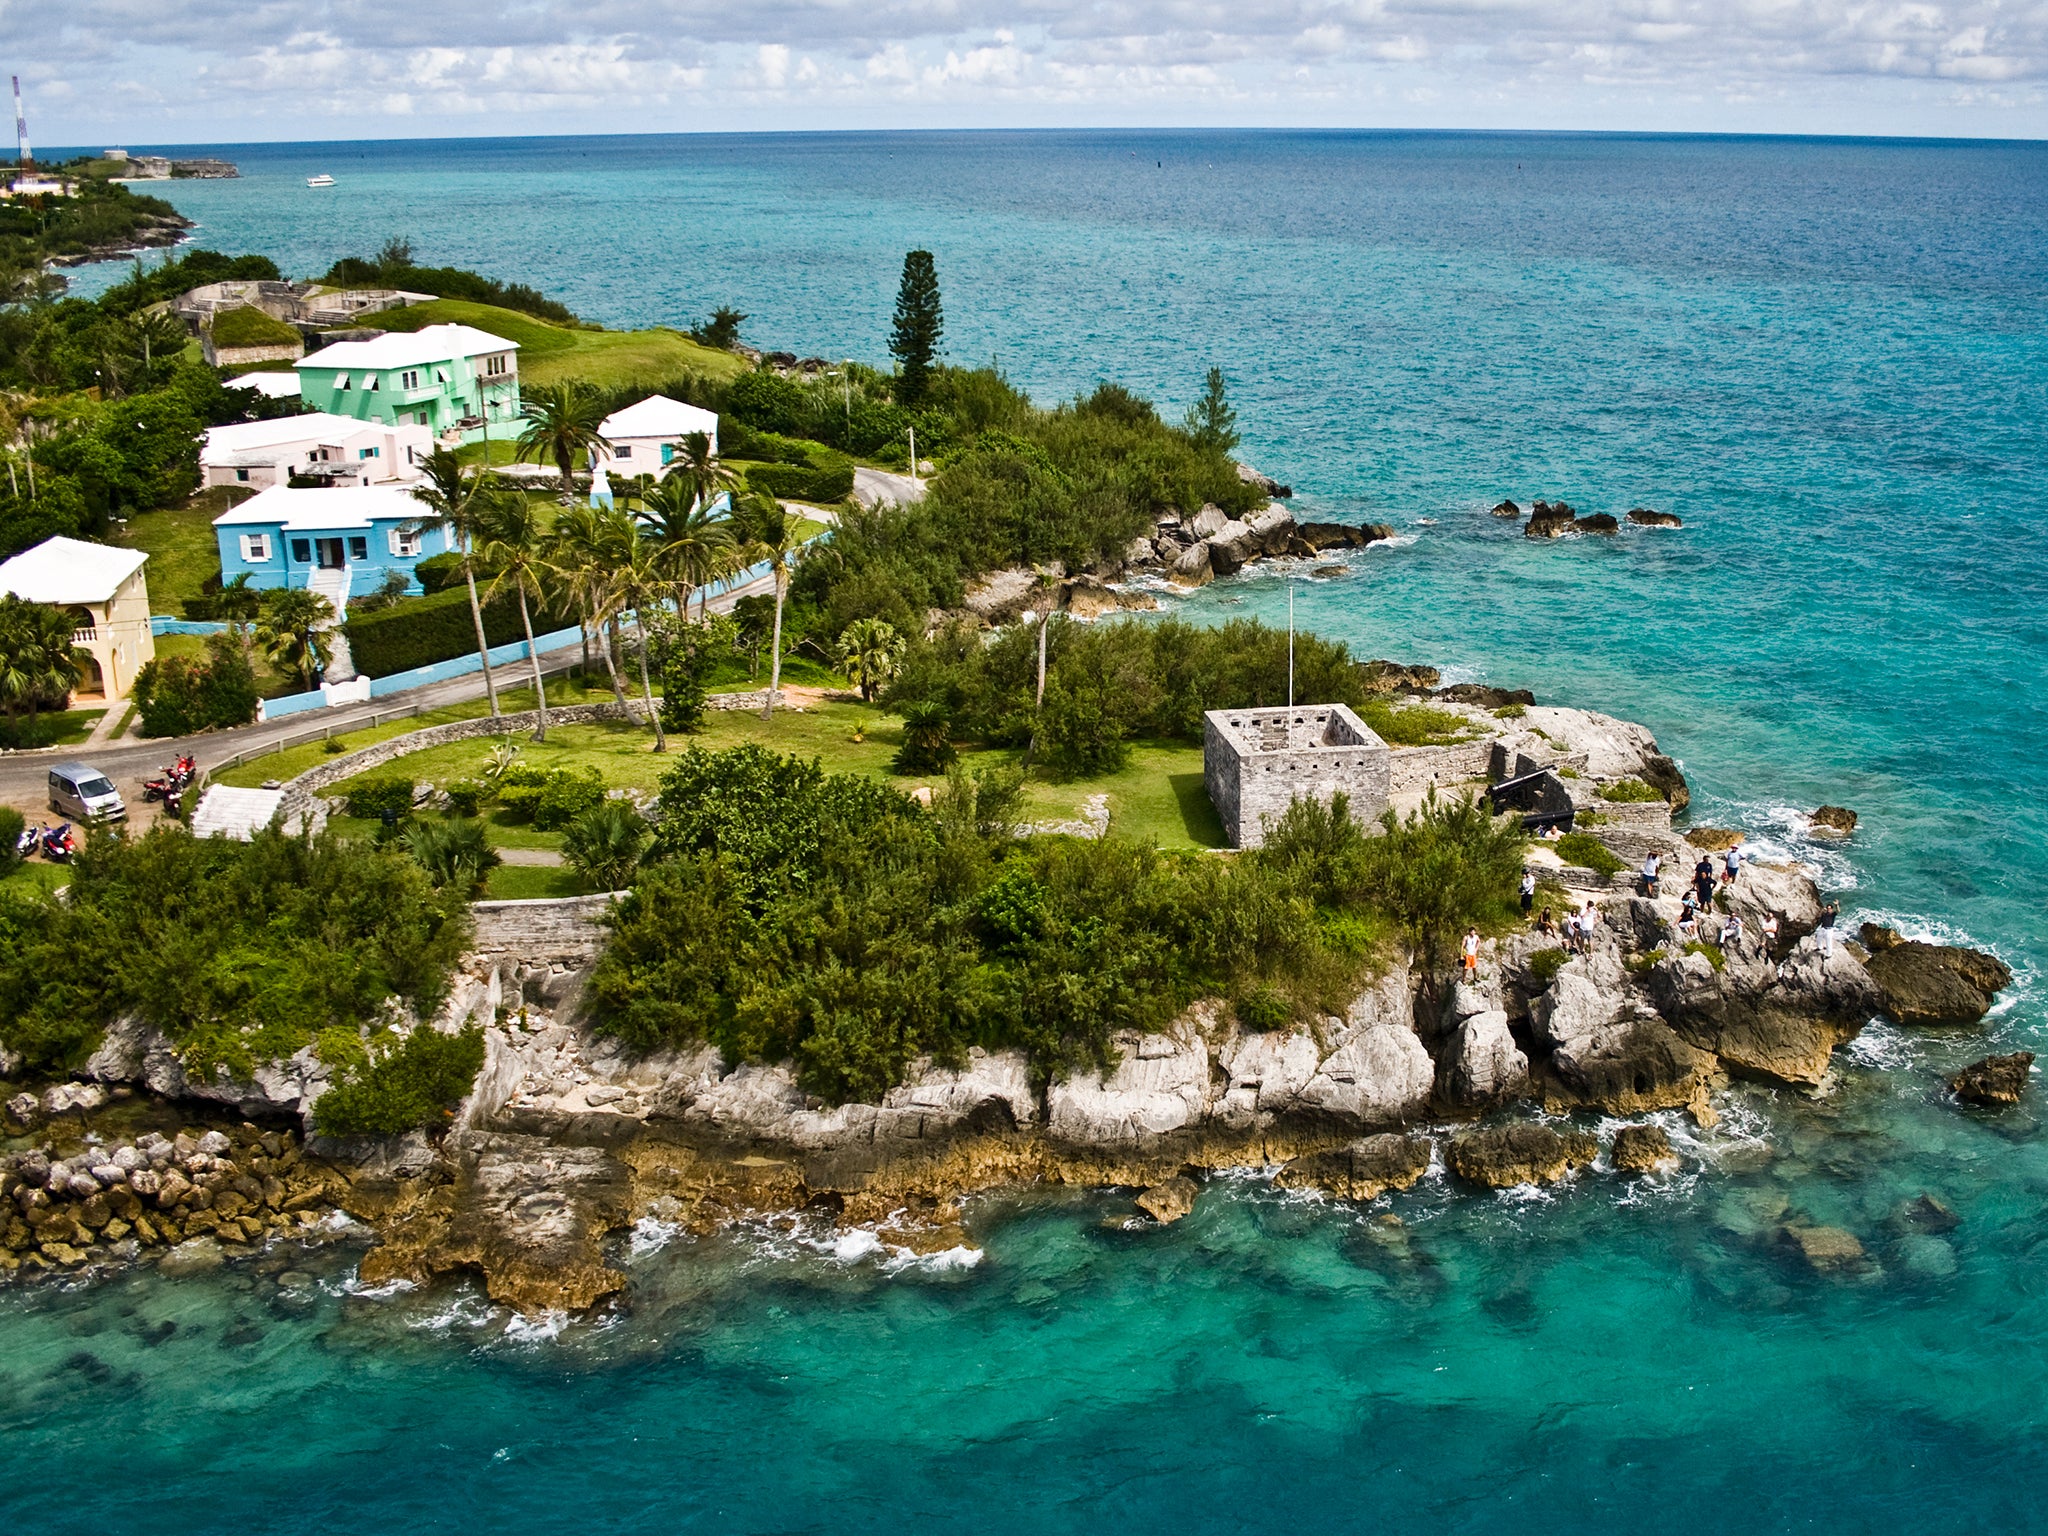 Bermuda: Sun kissed offshore tax haven creating controversy after leak of 'Paradise Papers'